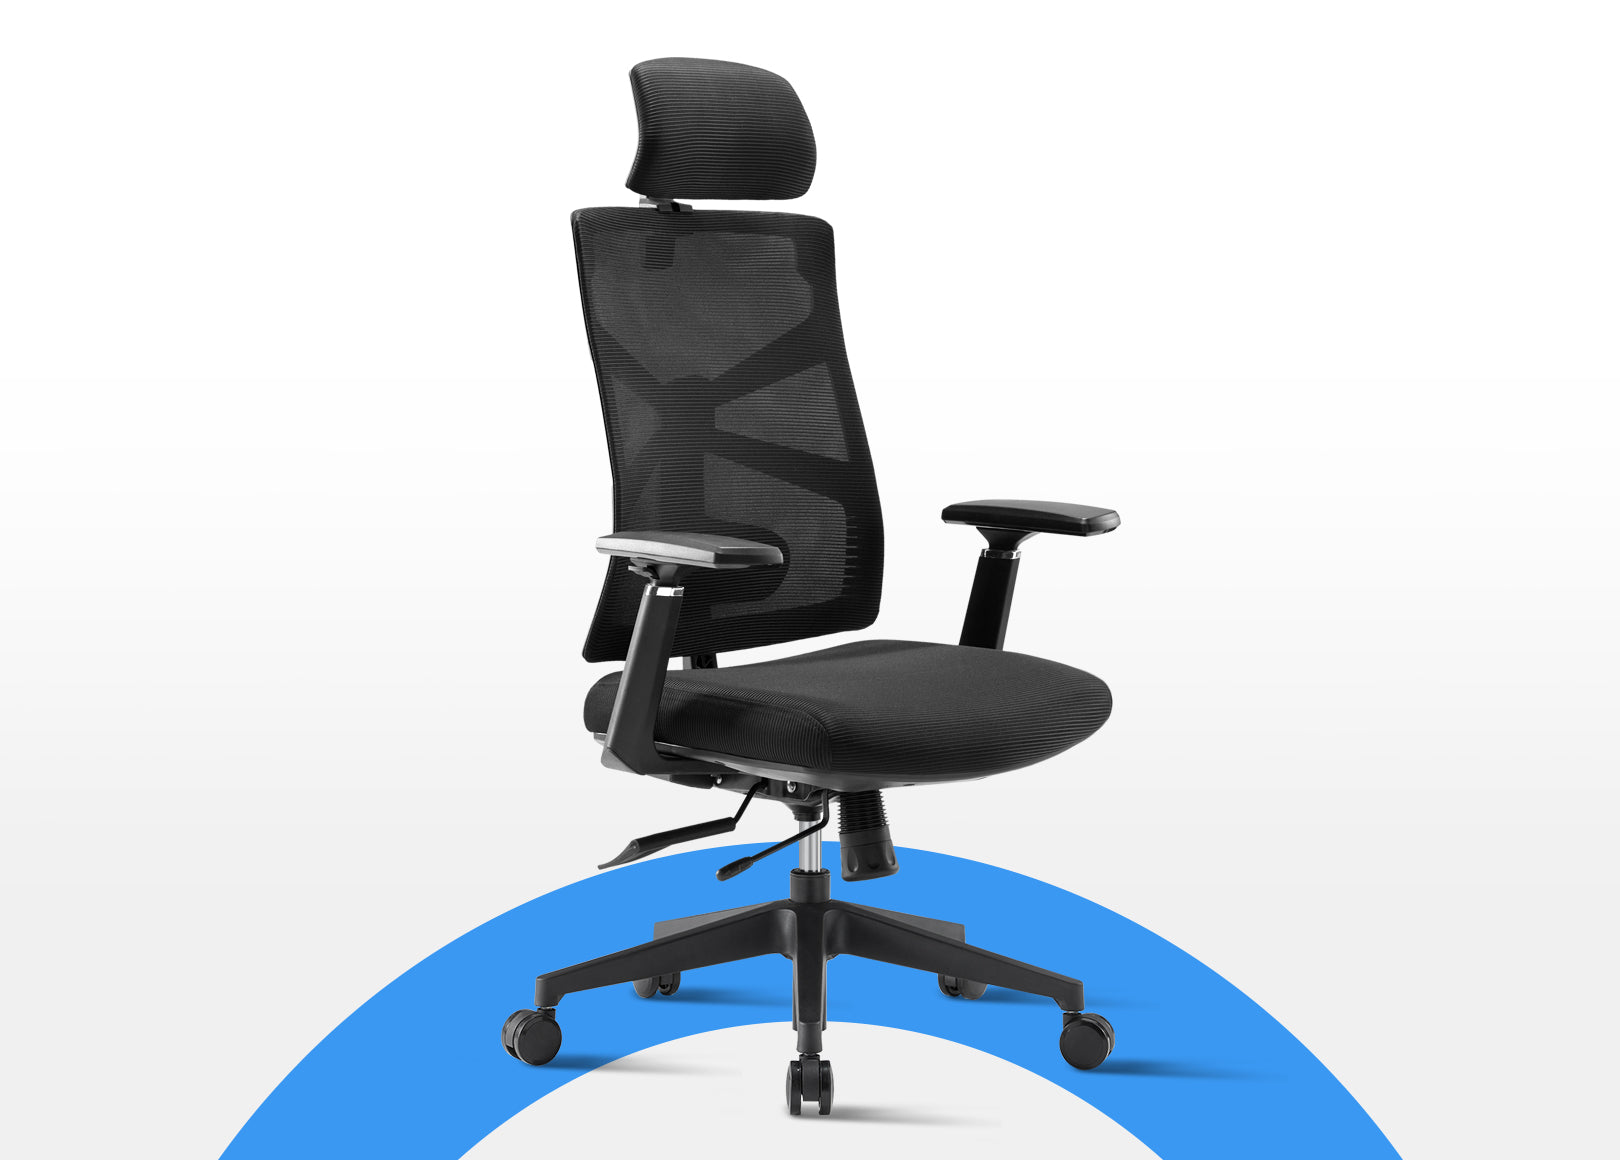 Black Voyager Pro Office Chair with Adjustable Armrests in height, length and pivot